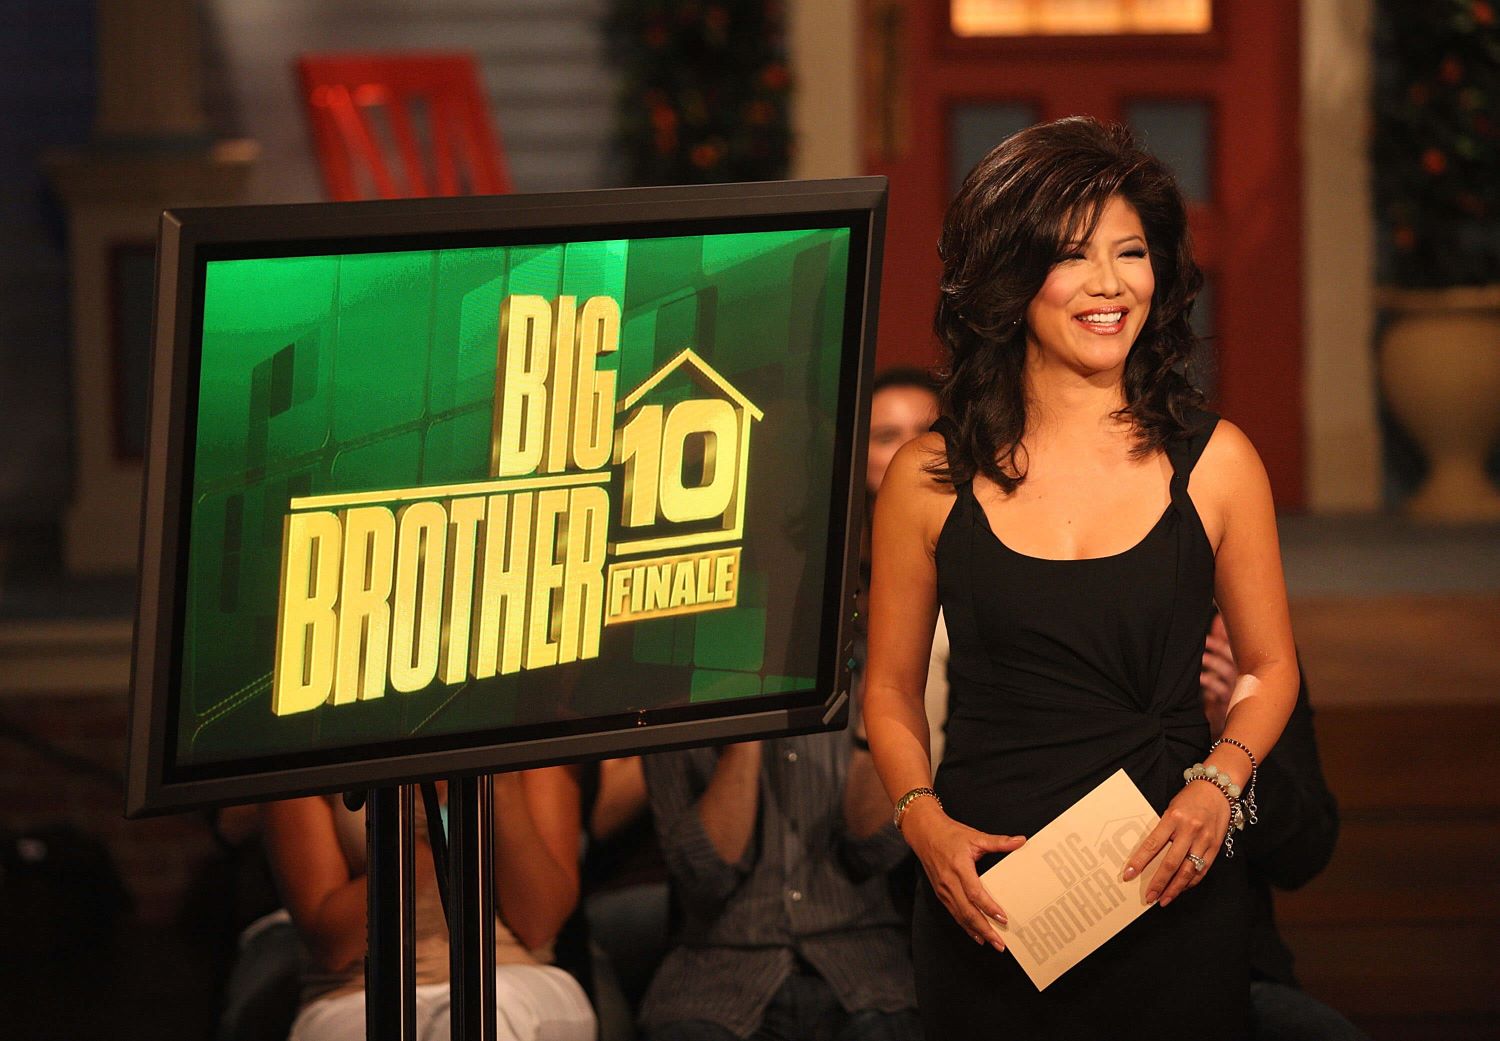 Julie Chen Moonves, the host of 'Big Brother,' appears during the season 10 finale wearing a black dress.